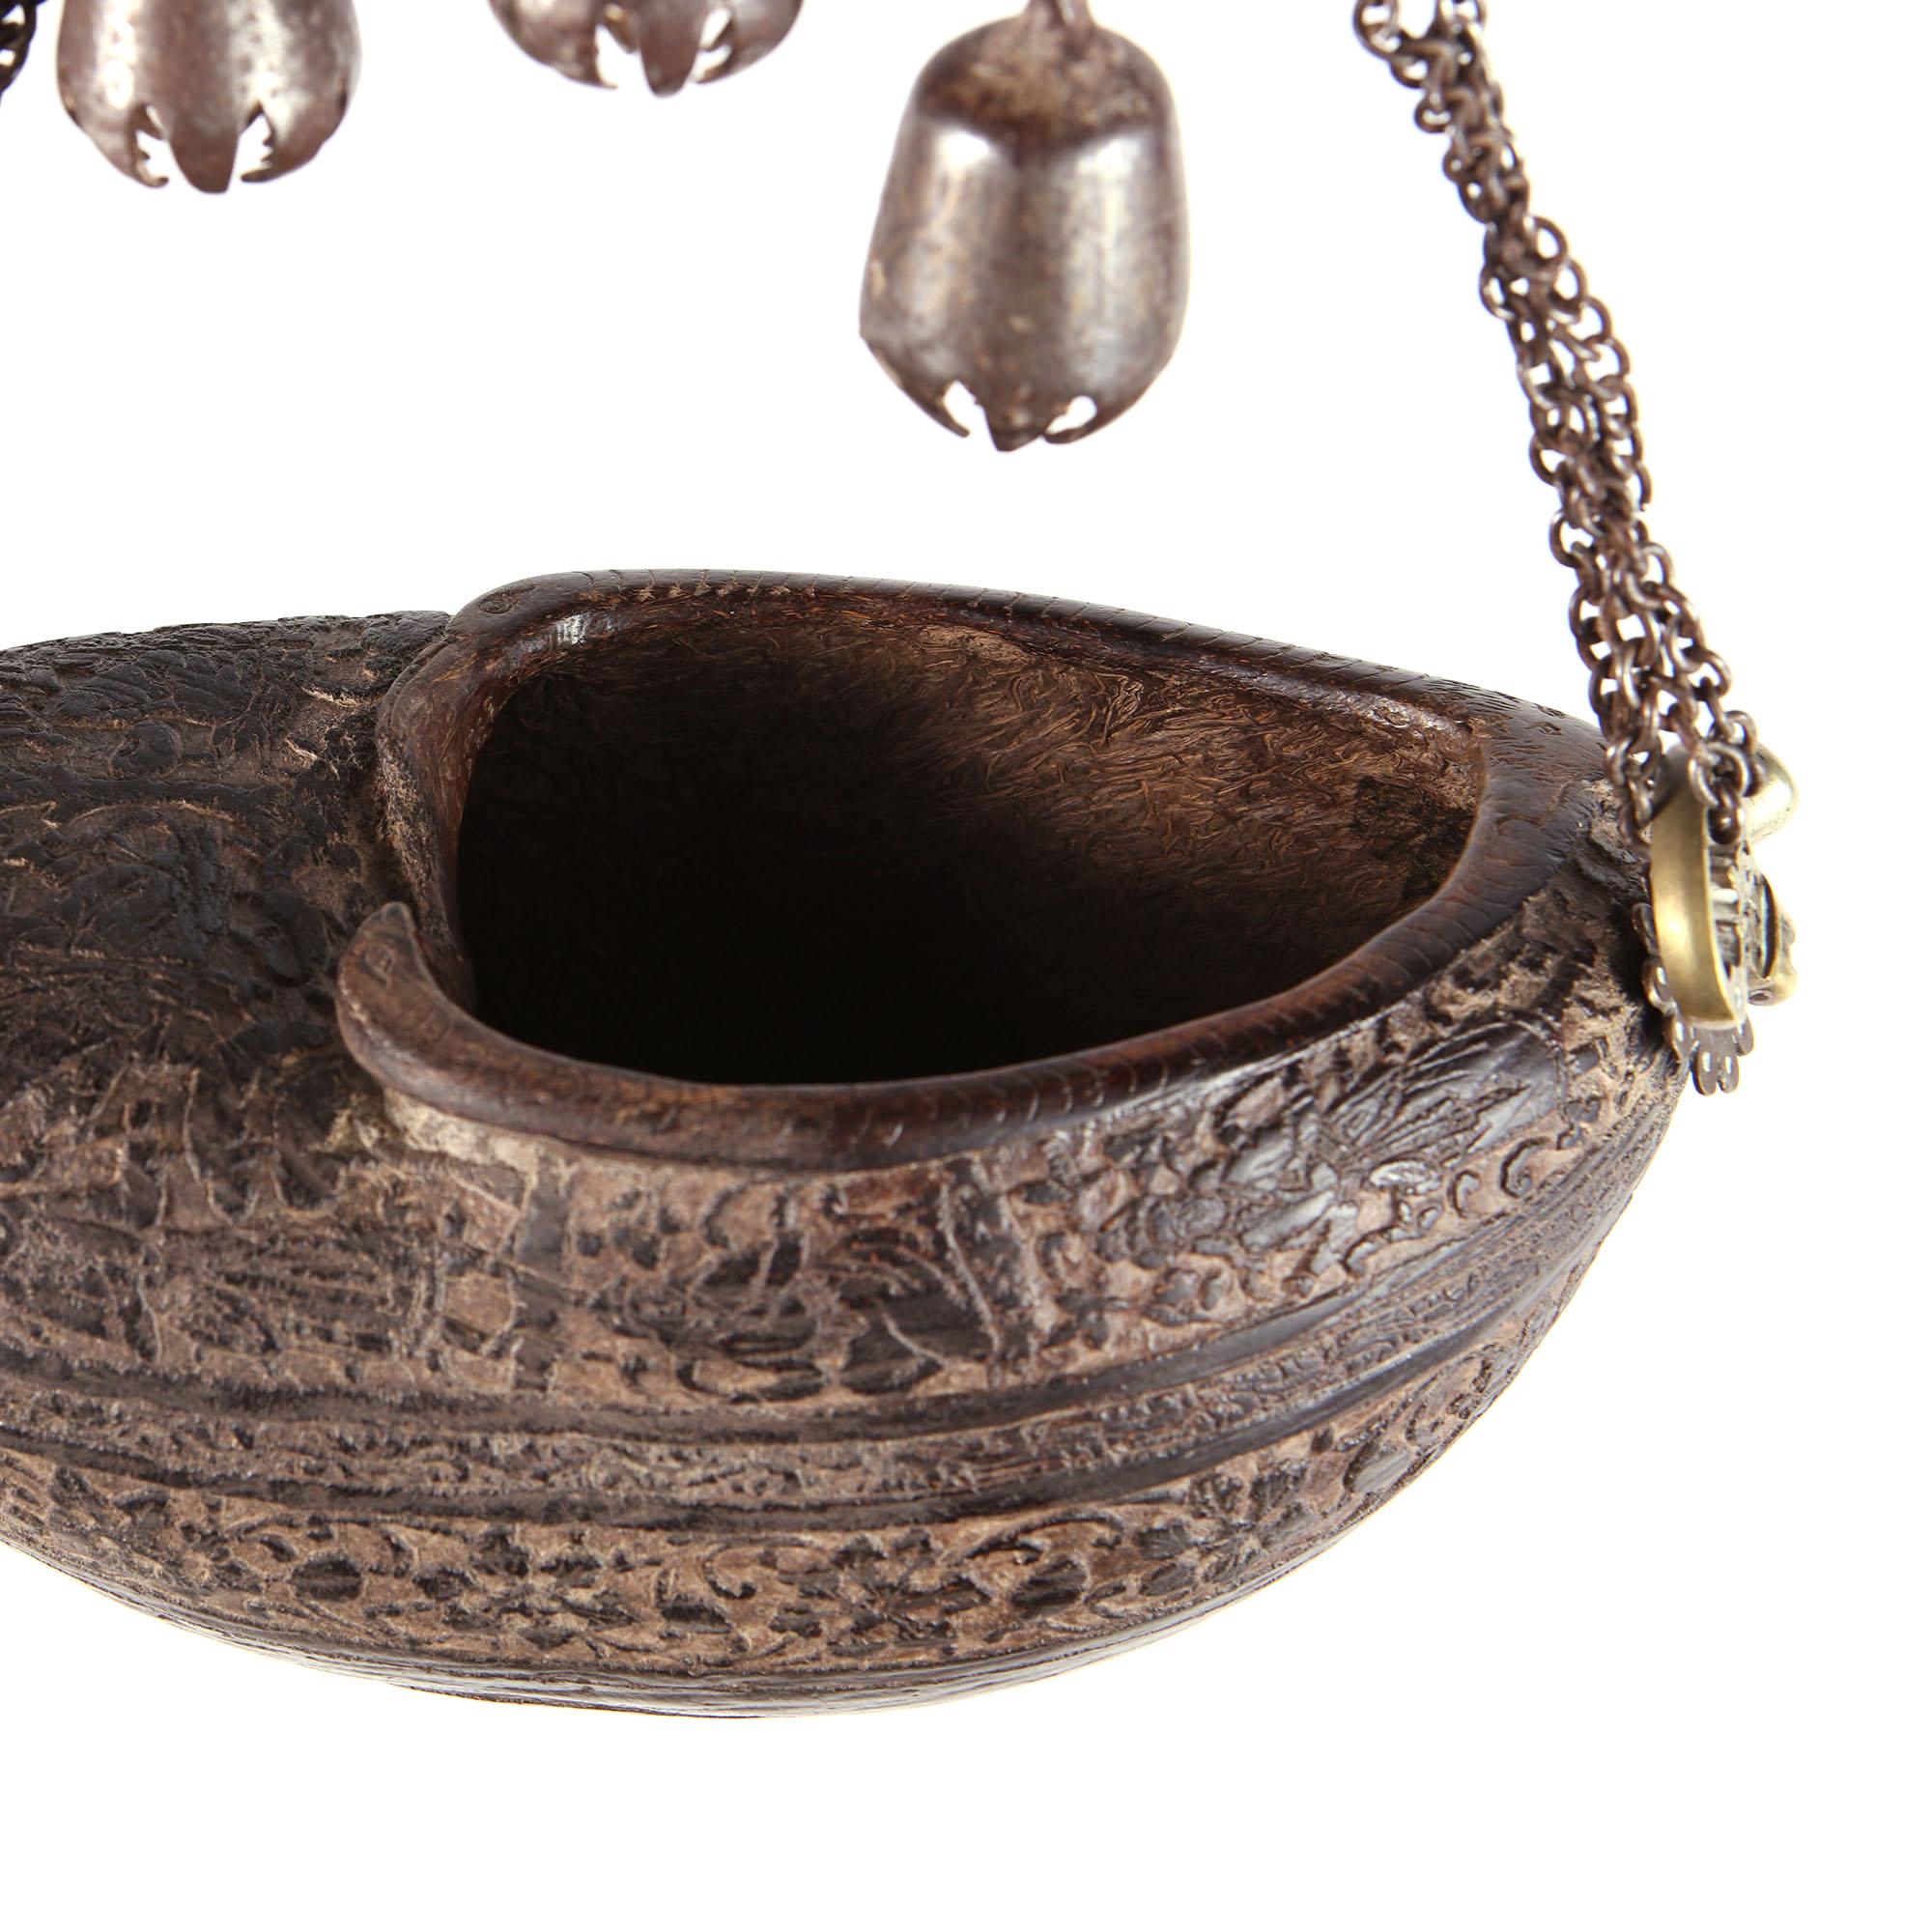 A fine 19th century Persian Kashkul or 'begging bowl' fashioned from half a coco de mer nut and suspended with chains. The sides with flowing foliate borders and sacred figurative scenes also incorporate anamorphic animal details, snakes, tigers,